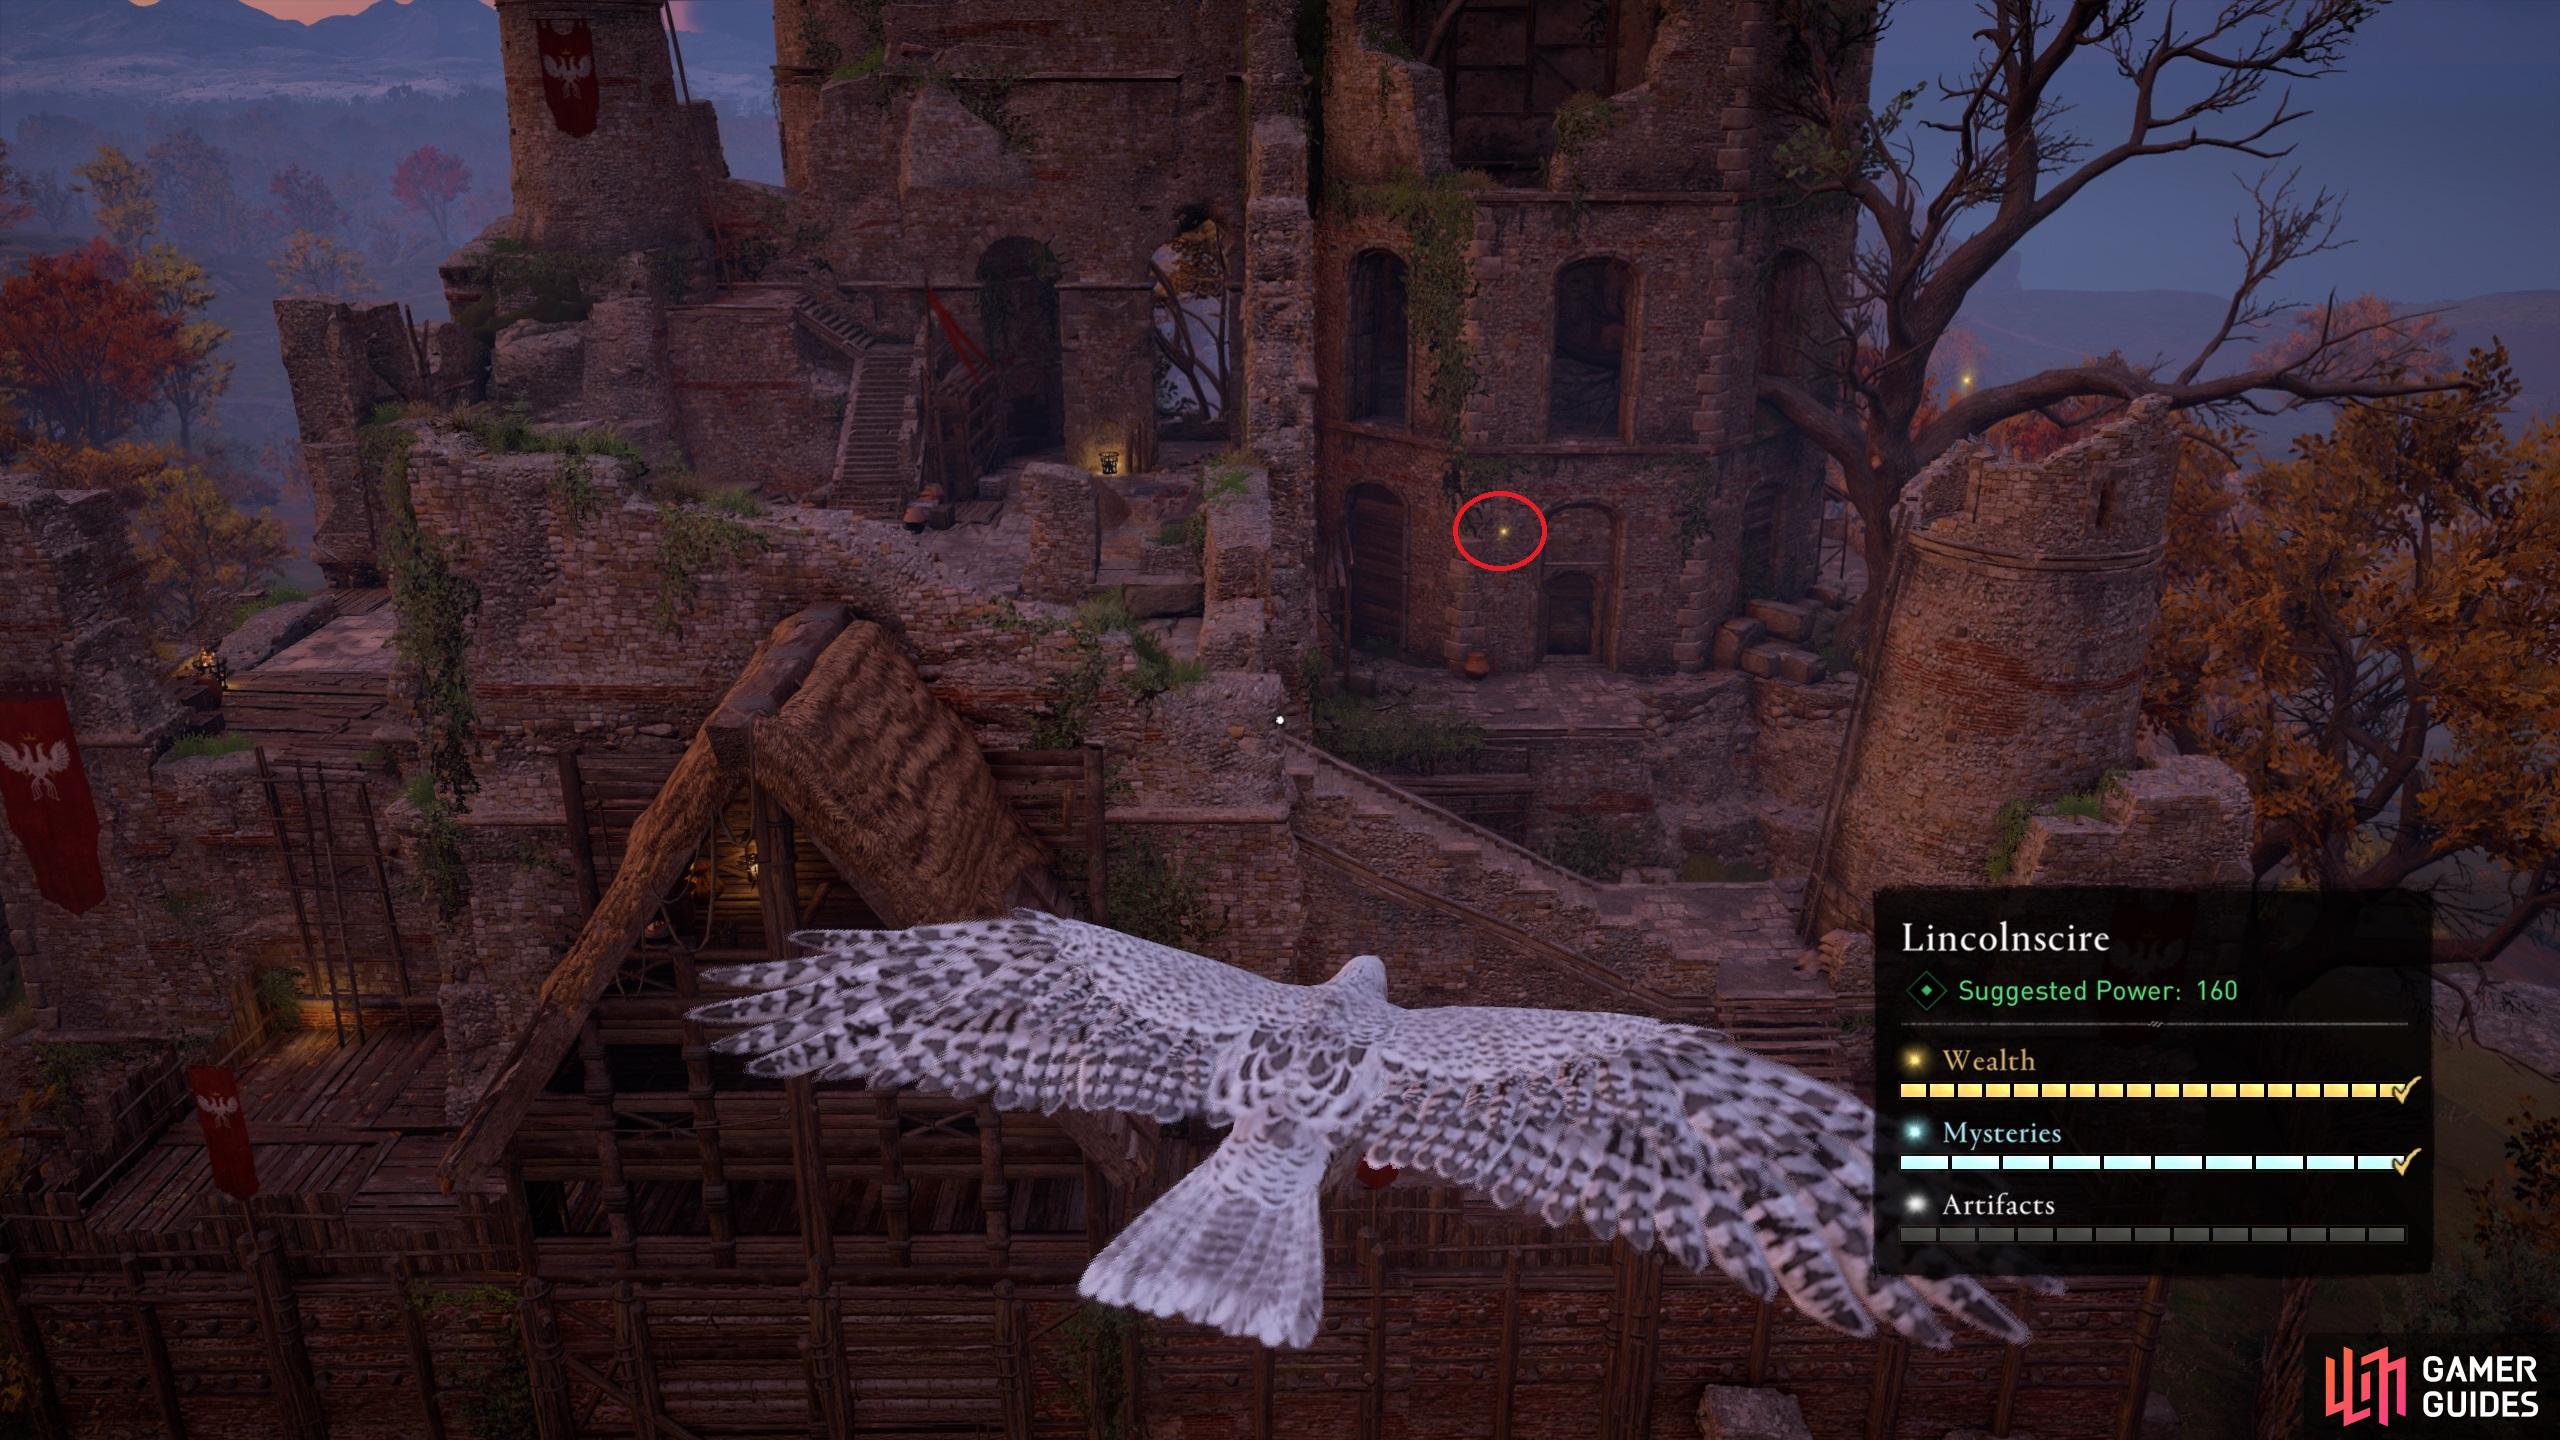 Use Odins Sight and your bird to identify the location of the Gedriht in the castle.